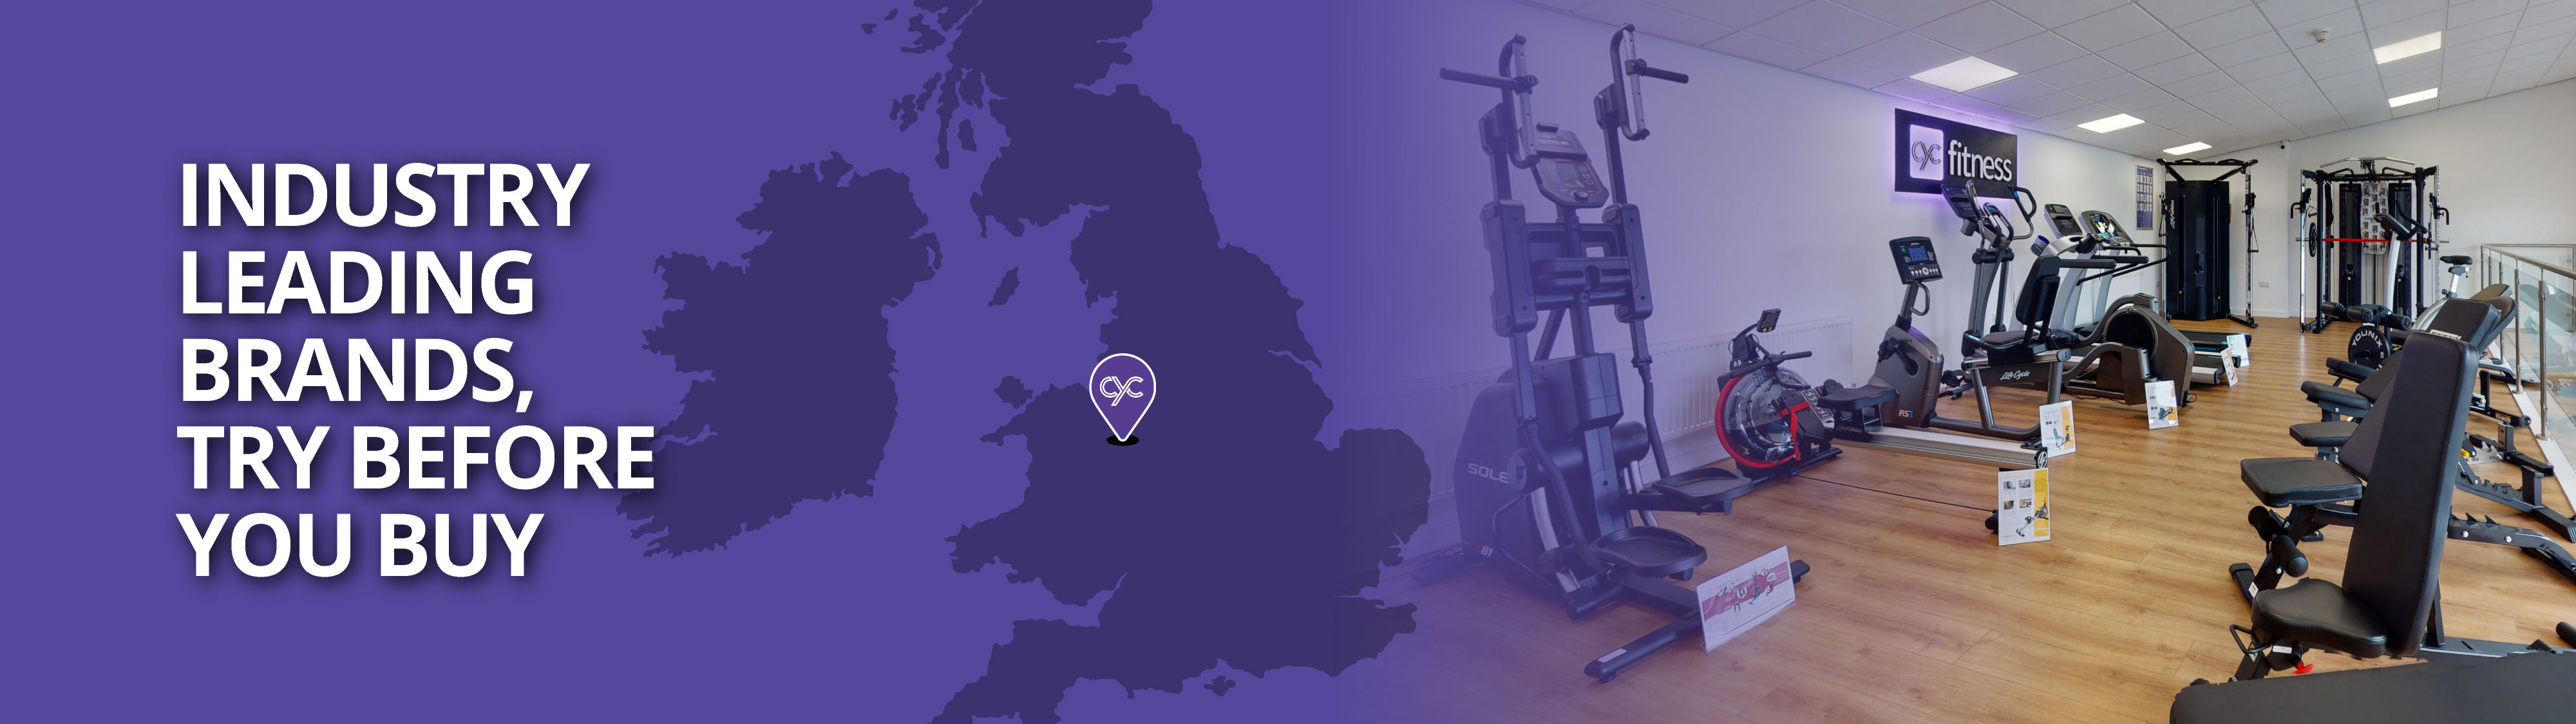 Visit our 4500 sqft commercial and home fitness showroom - Try before you buy with expert advice